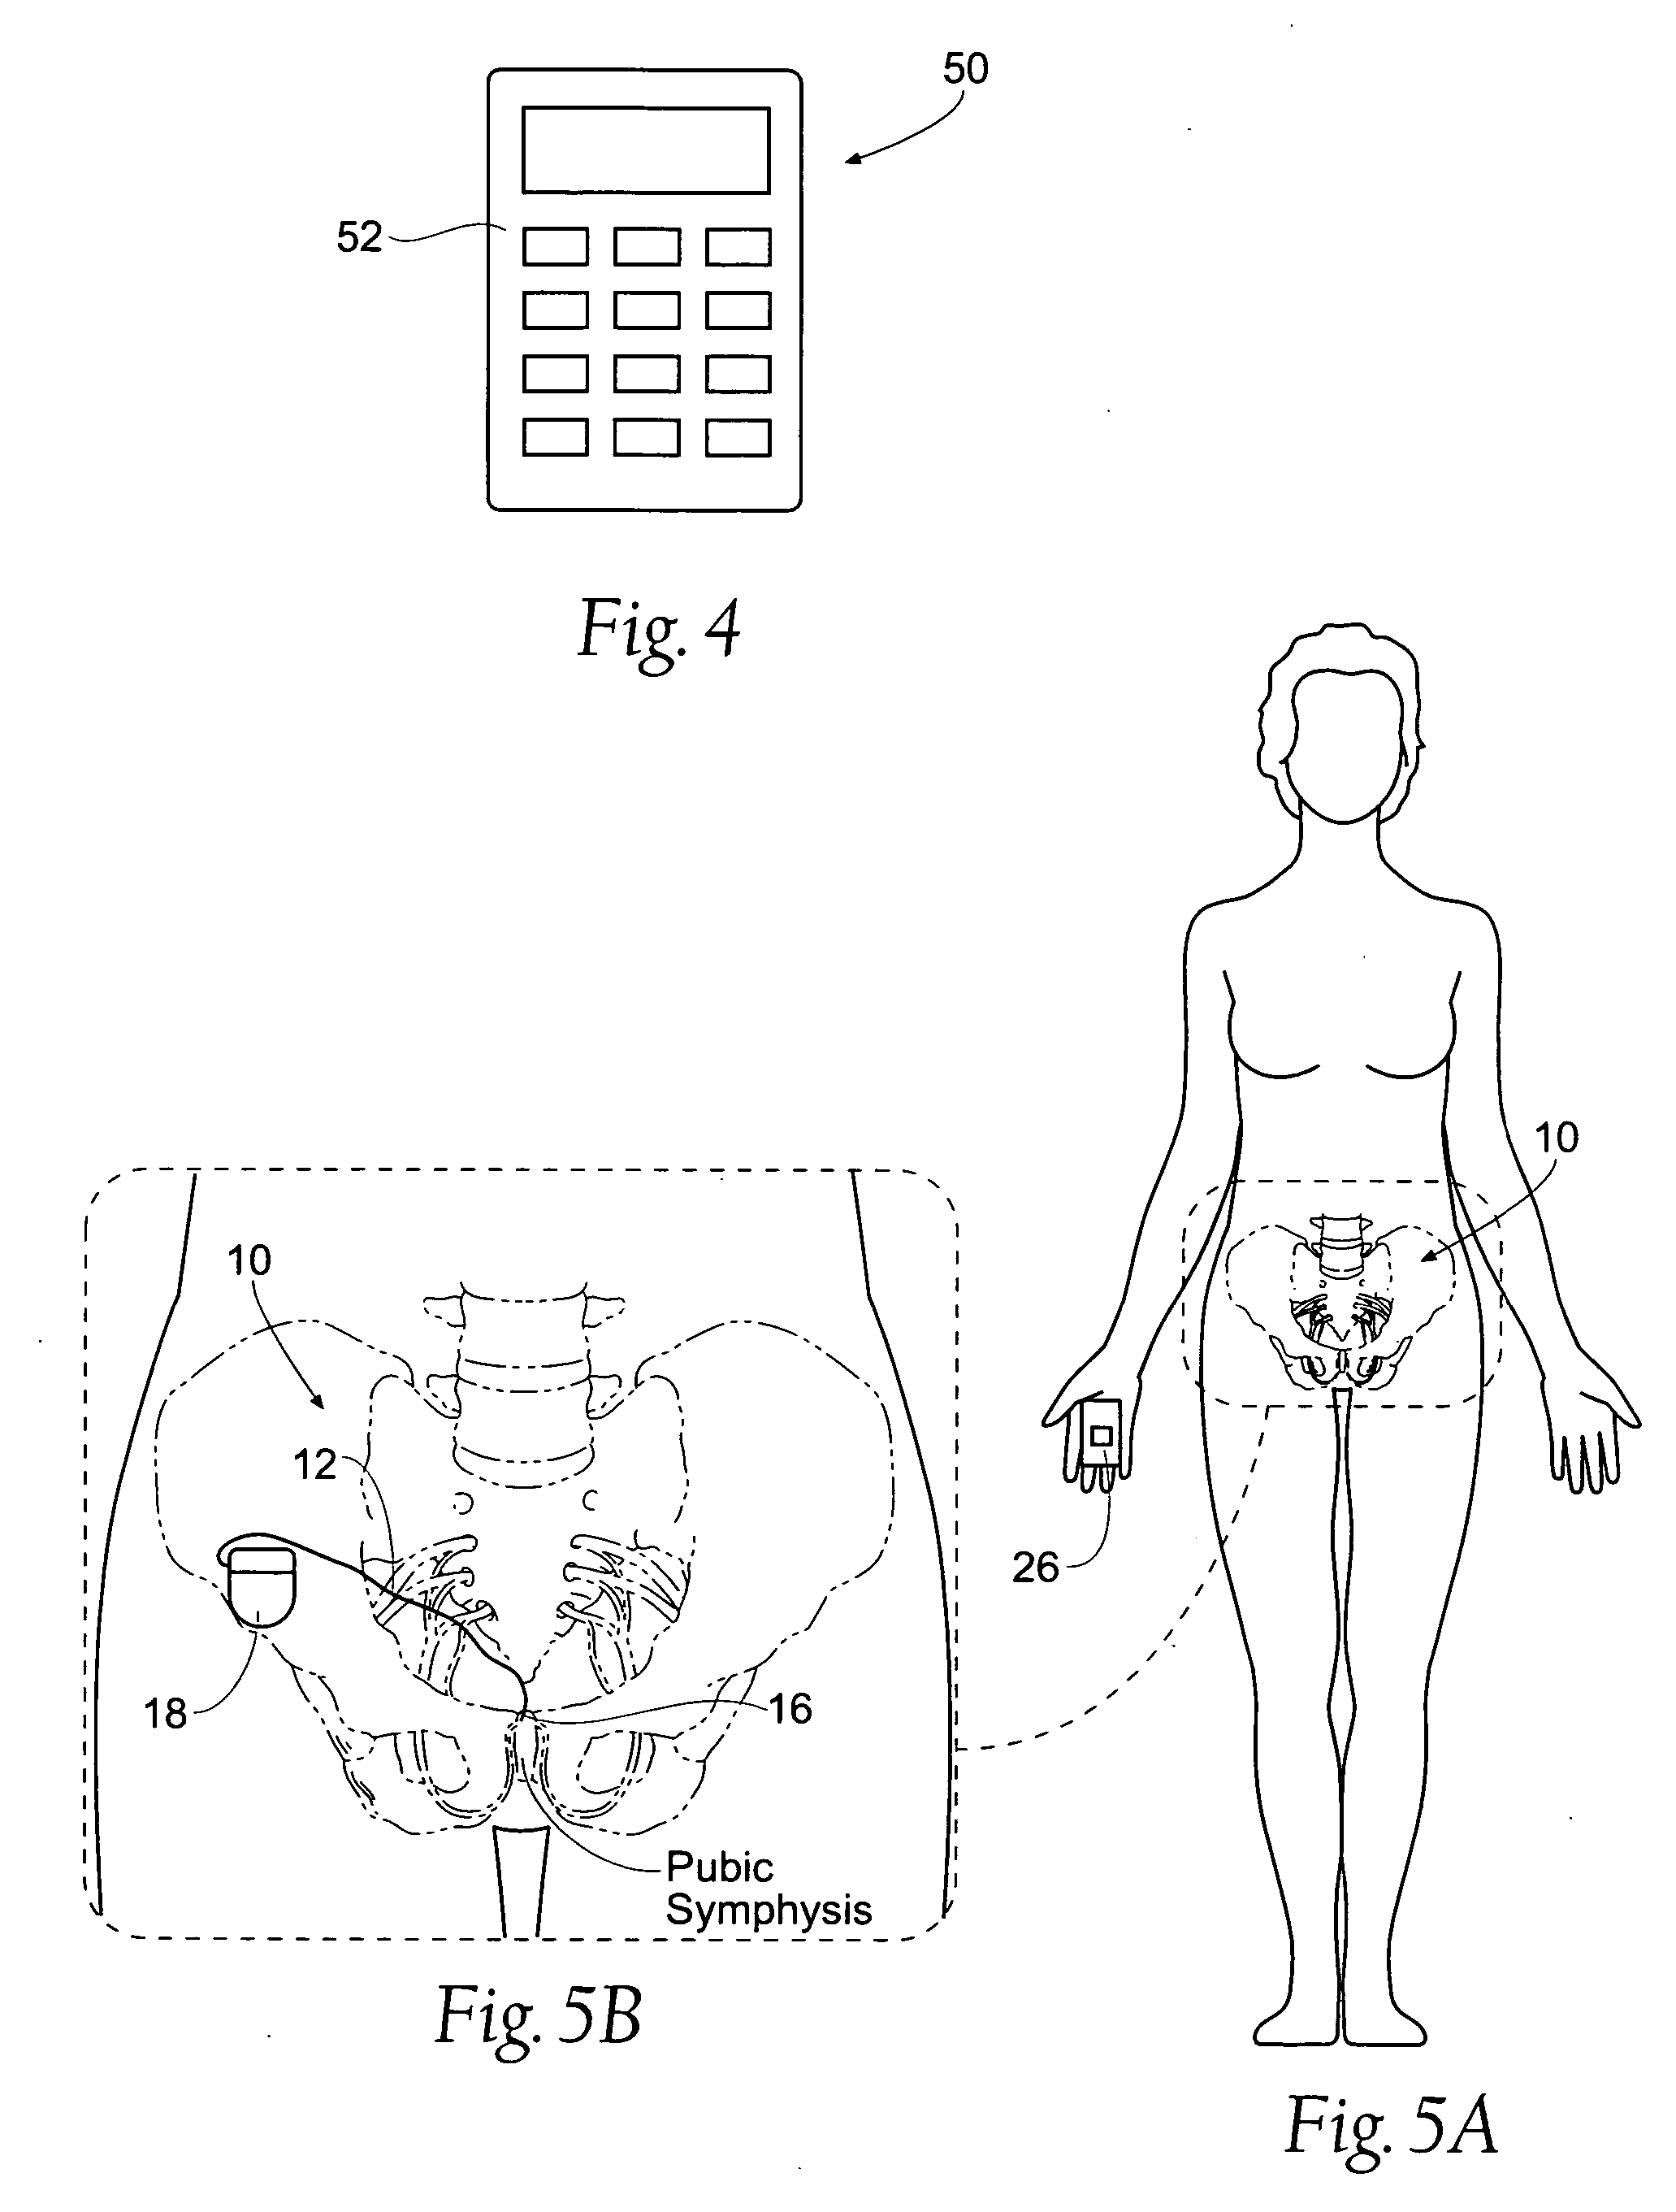 Systems and methods for bilateral stimulation of left and right branches of the dorsal genital nerves to treat dysfunctions, such as urinary incontinence